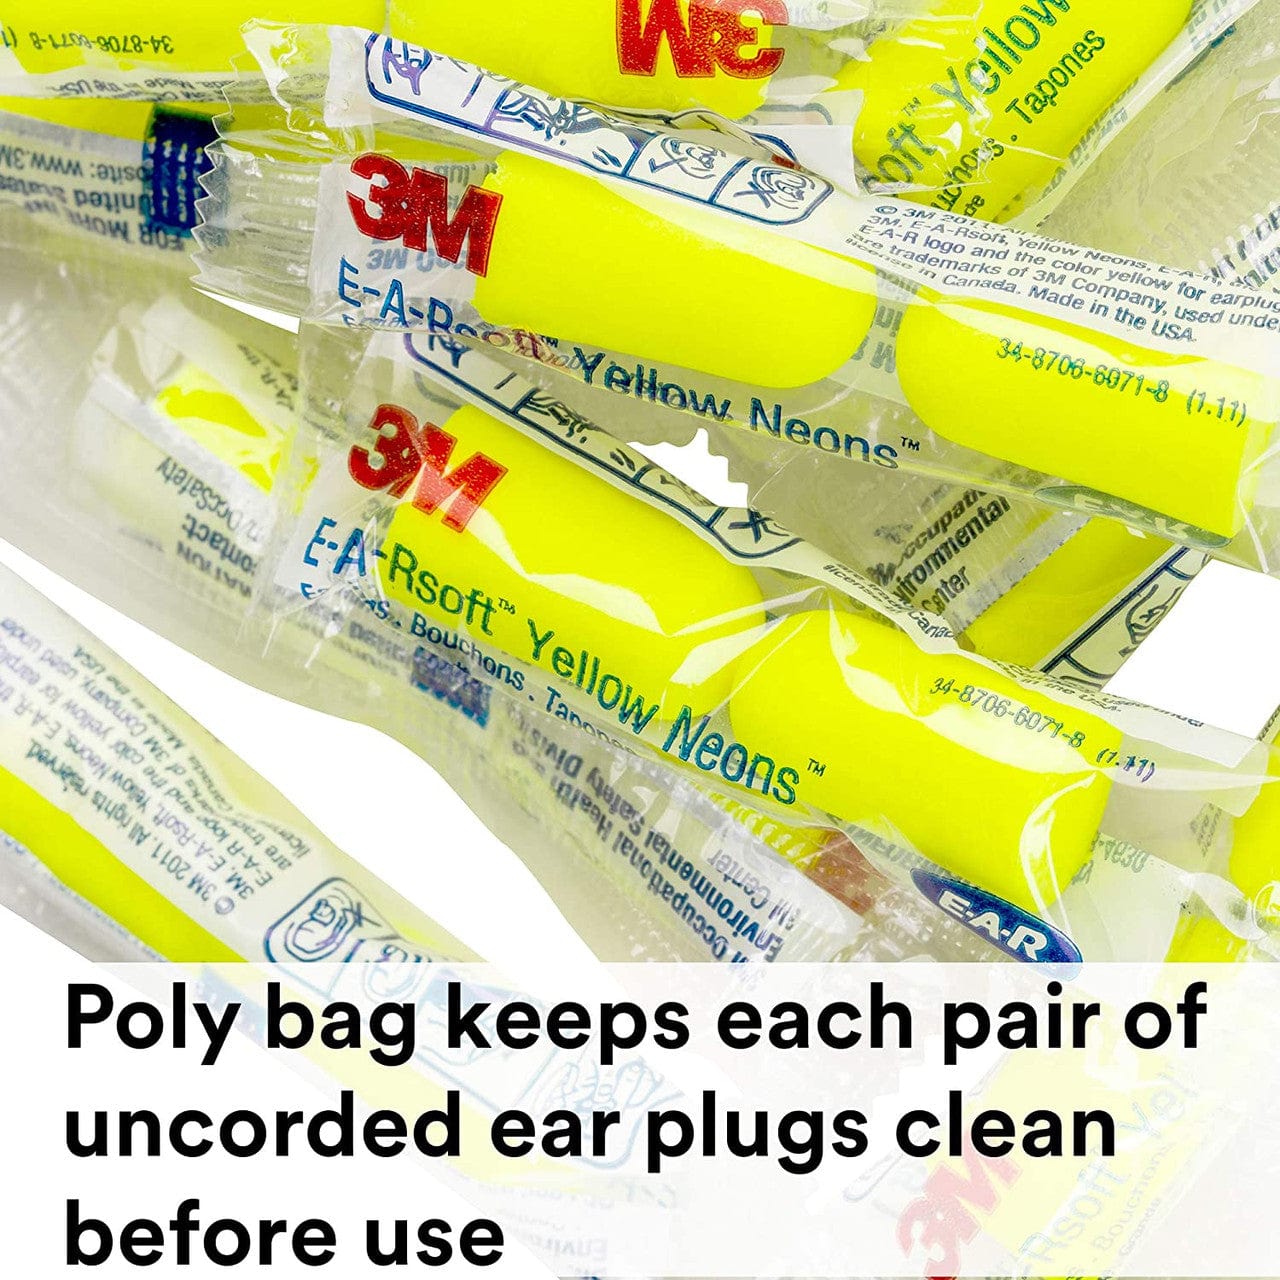 3M E-A-RSoft Yellow Neons 312-1250 Uncorded Earplugs NRR-33 Packaging